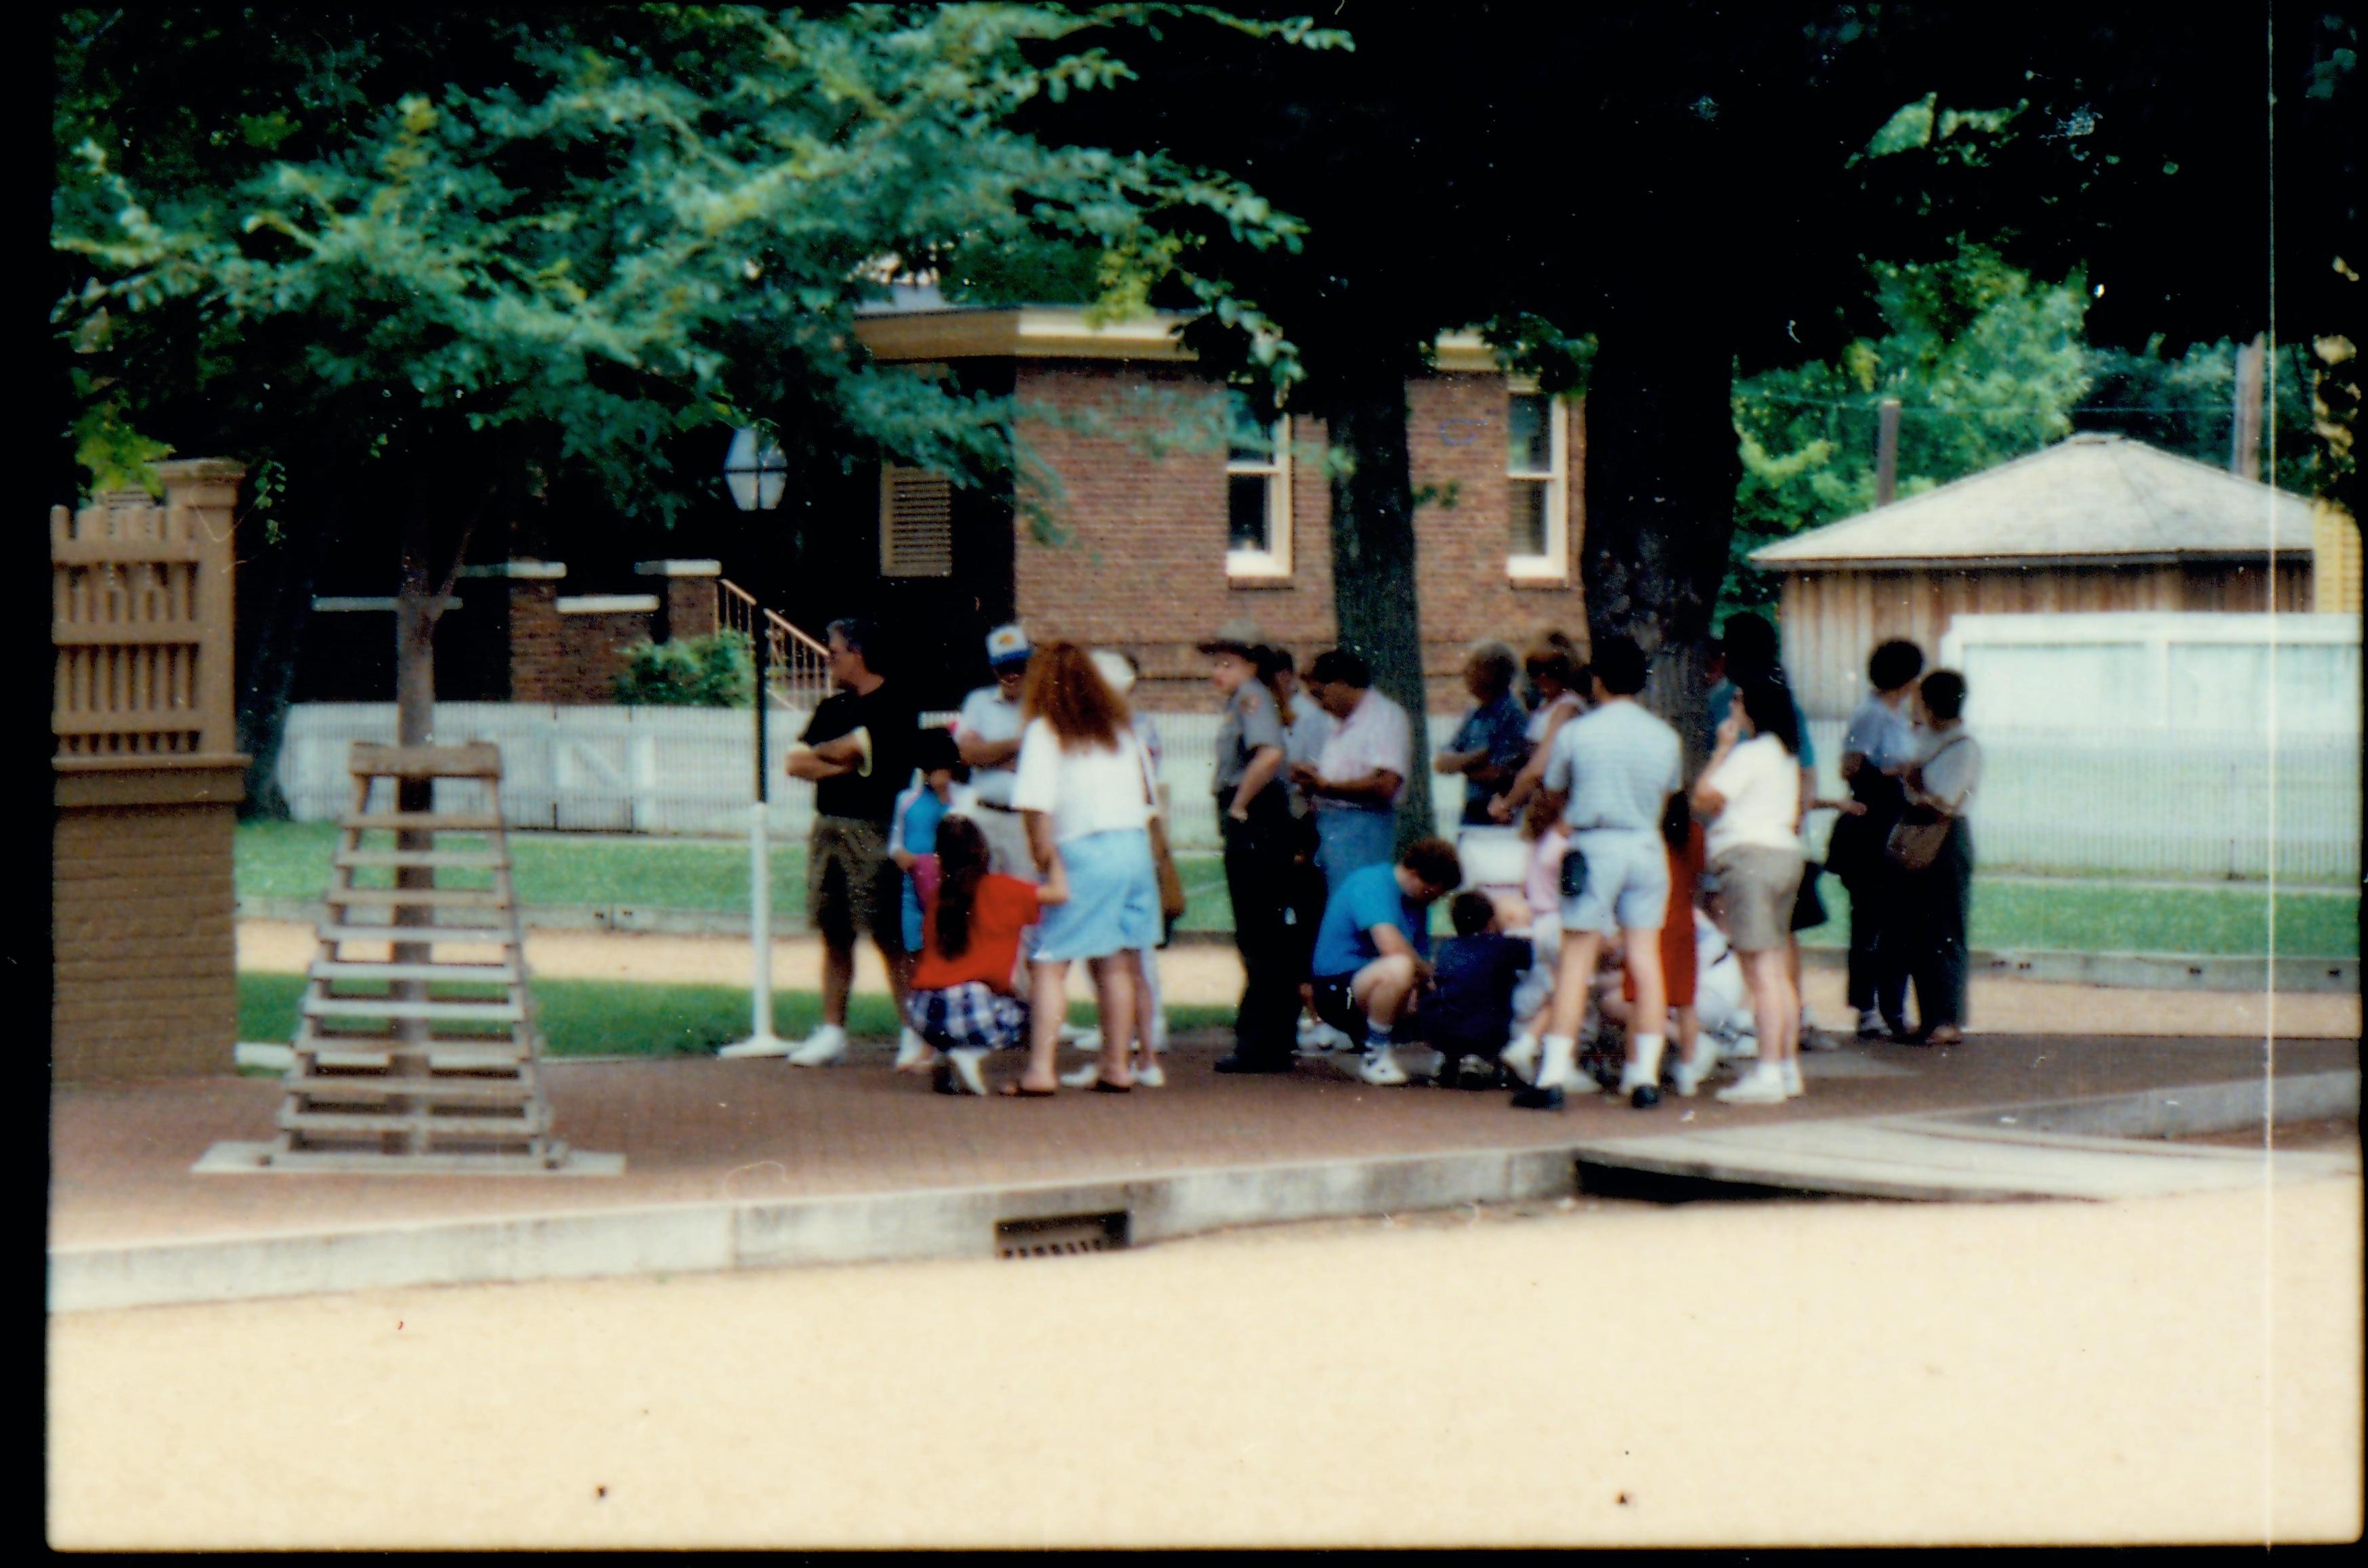 A ranger with a group of visitors on the brick plaza south west of the Lincoln Home. Summer. Unrestored Arnold House in background. Photographer facing south east.